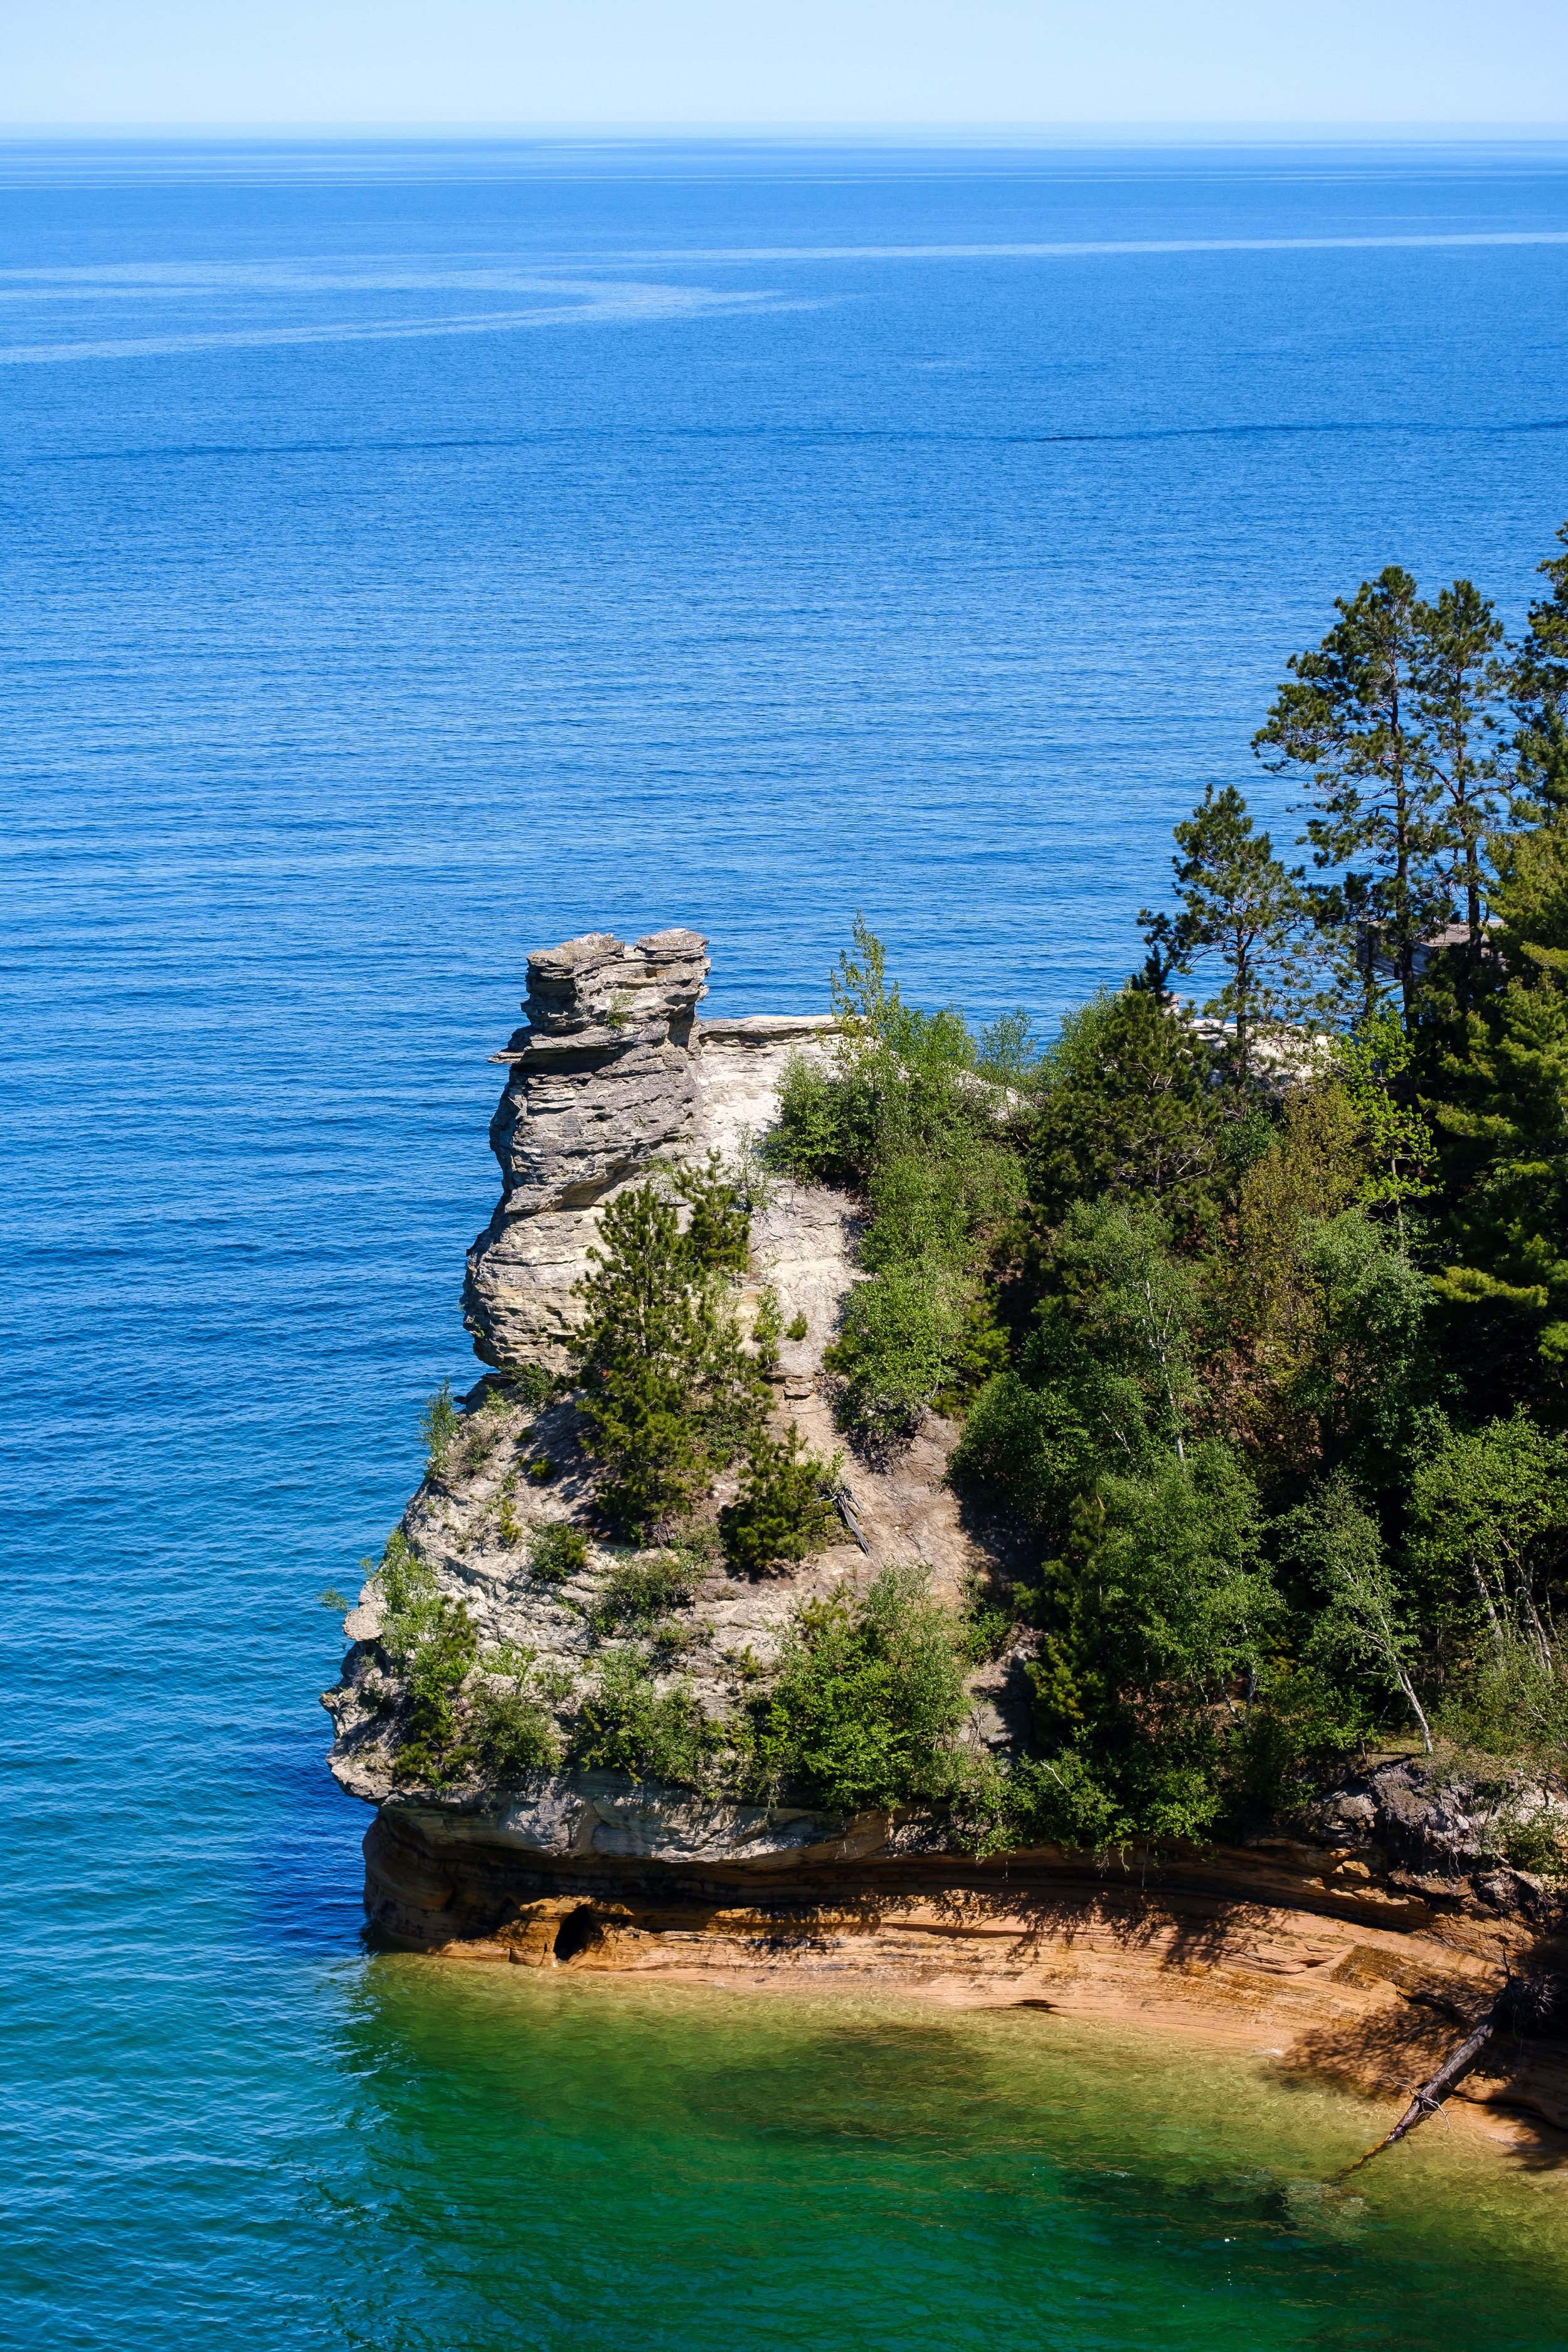  Miner’s Castle in Pictured Rocks. In the 1800s this area was one of the leading producers of iron ore. 